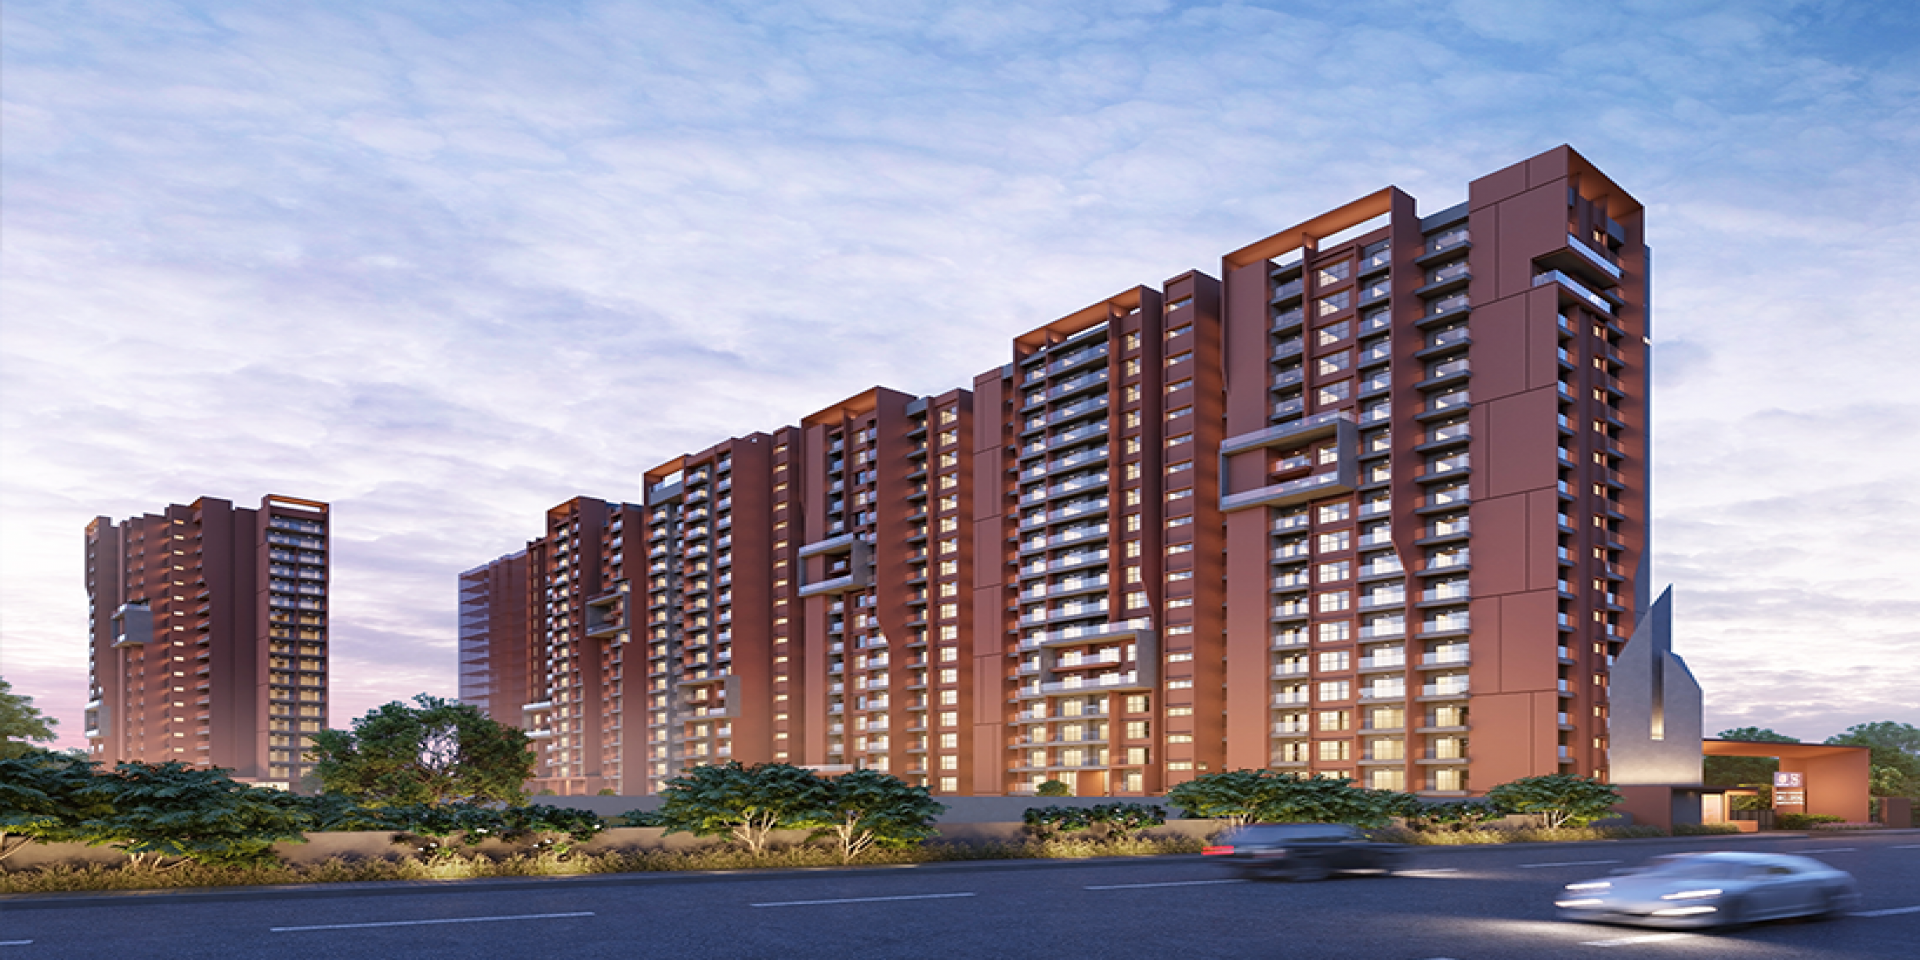 2, 3, 4 BHK Apartment for sale in HSR Layout Sector 2